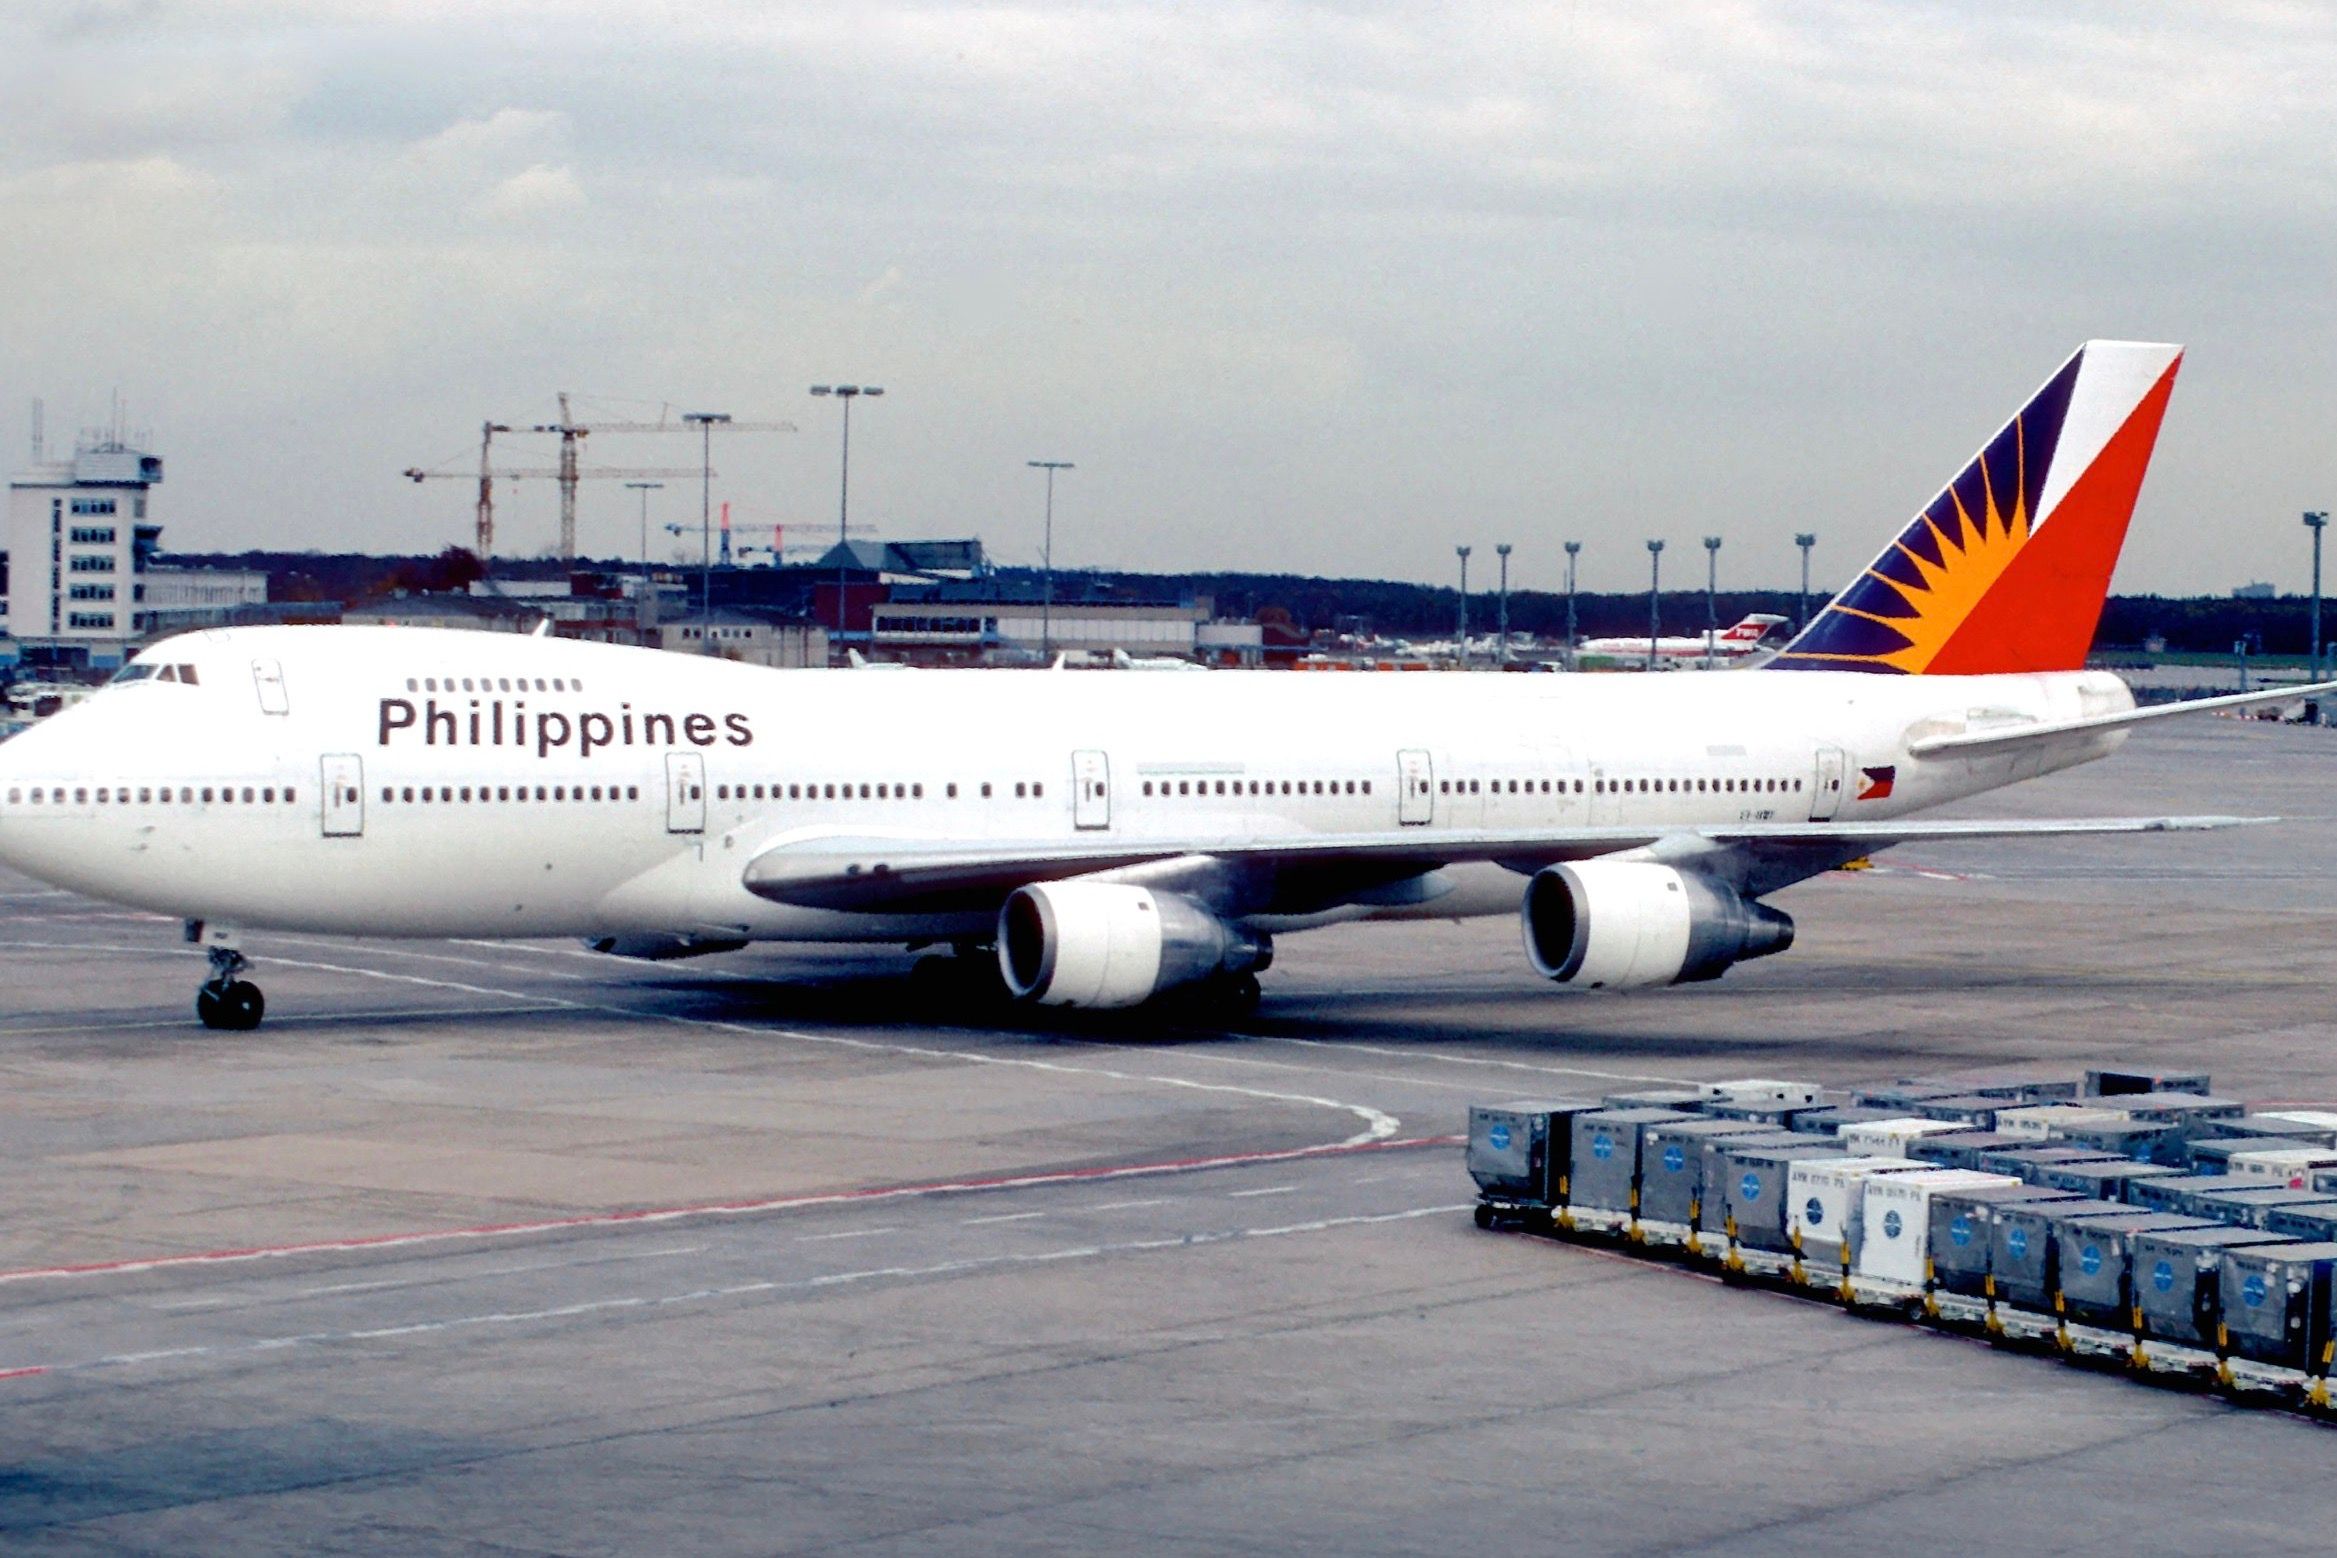 A Philippine Airlines Boeing 747 taxiing to the airport gate.